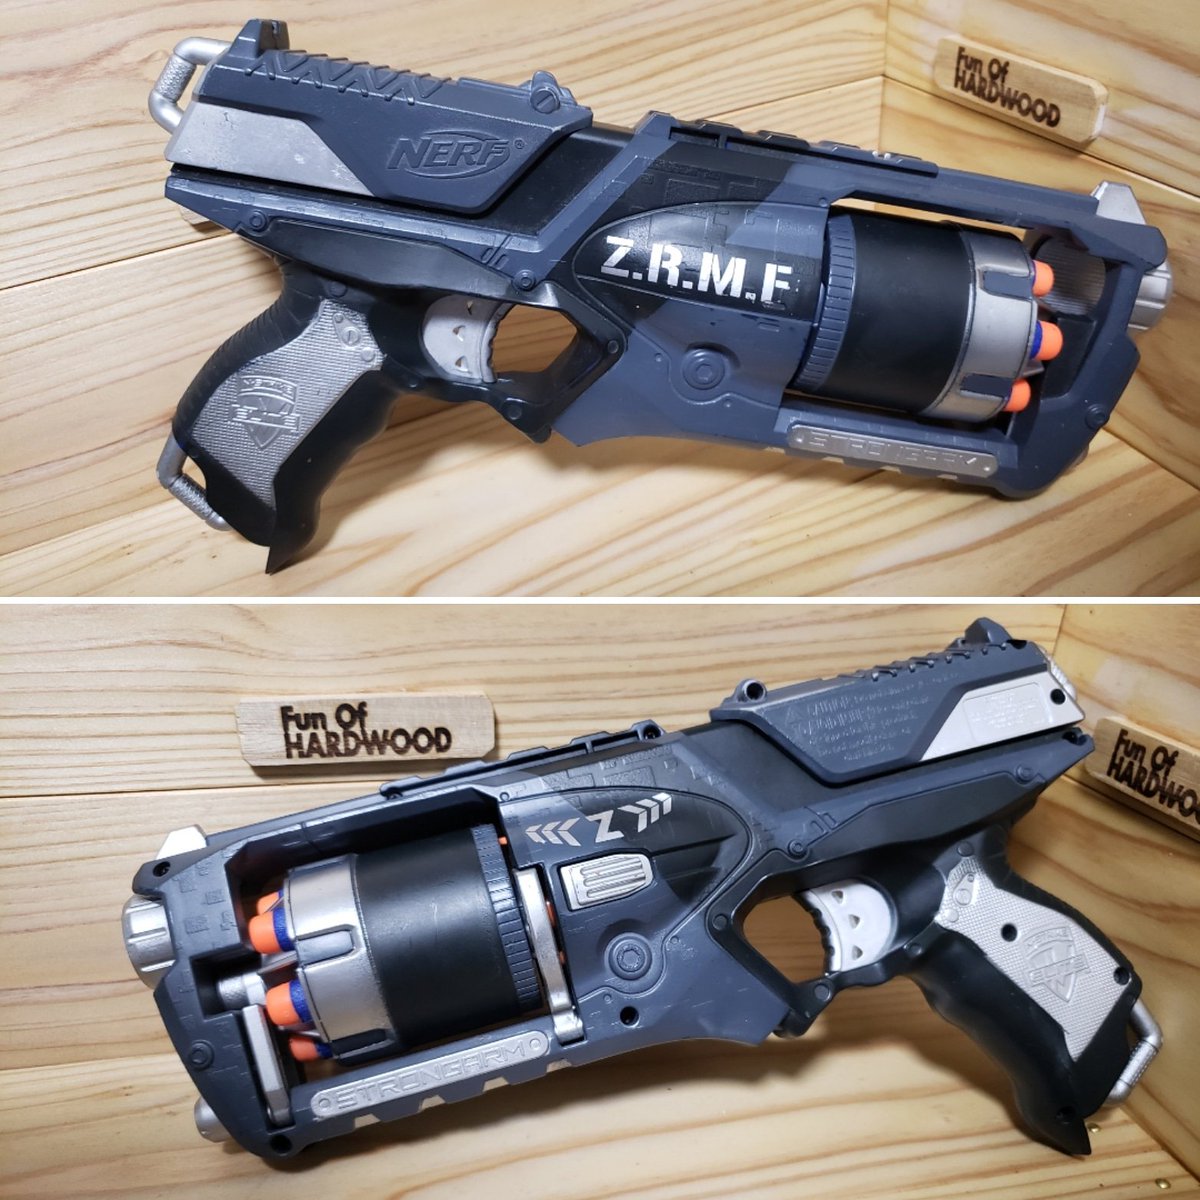 Zebra Rider On Twitter Nerf Strong Arm Z R M F Version This Is Nerf I Painted For The First Time In 2014 Nerf Nerfgun Nerfpaint Strongarm Zrmf ナーフ ストロングアーム 初めて ナーフ塗装 玩具 ハズブロ Hasbro